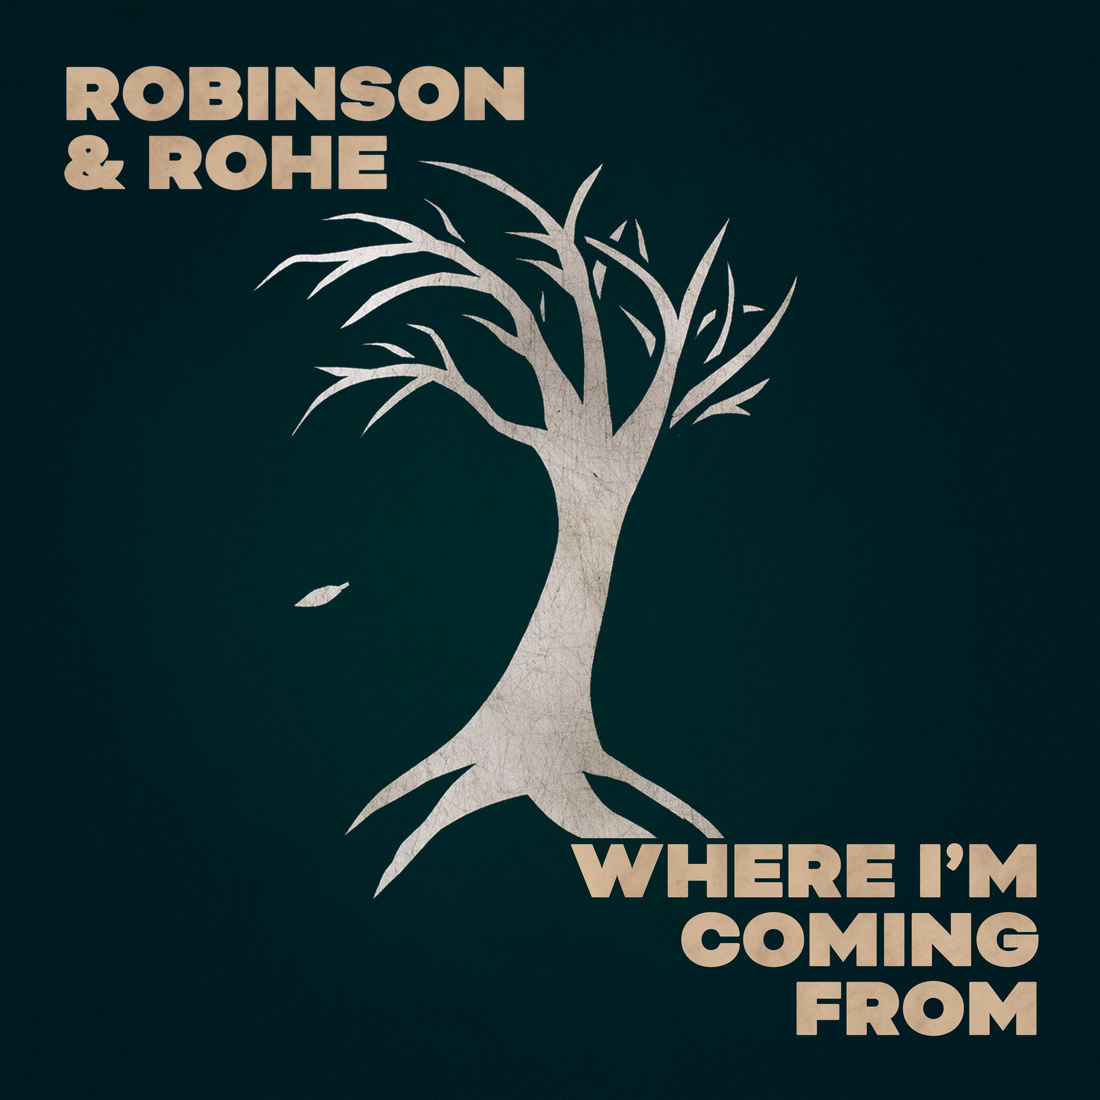 Robinson & Rohe's second single "Where I'm Coming From" out now